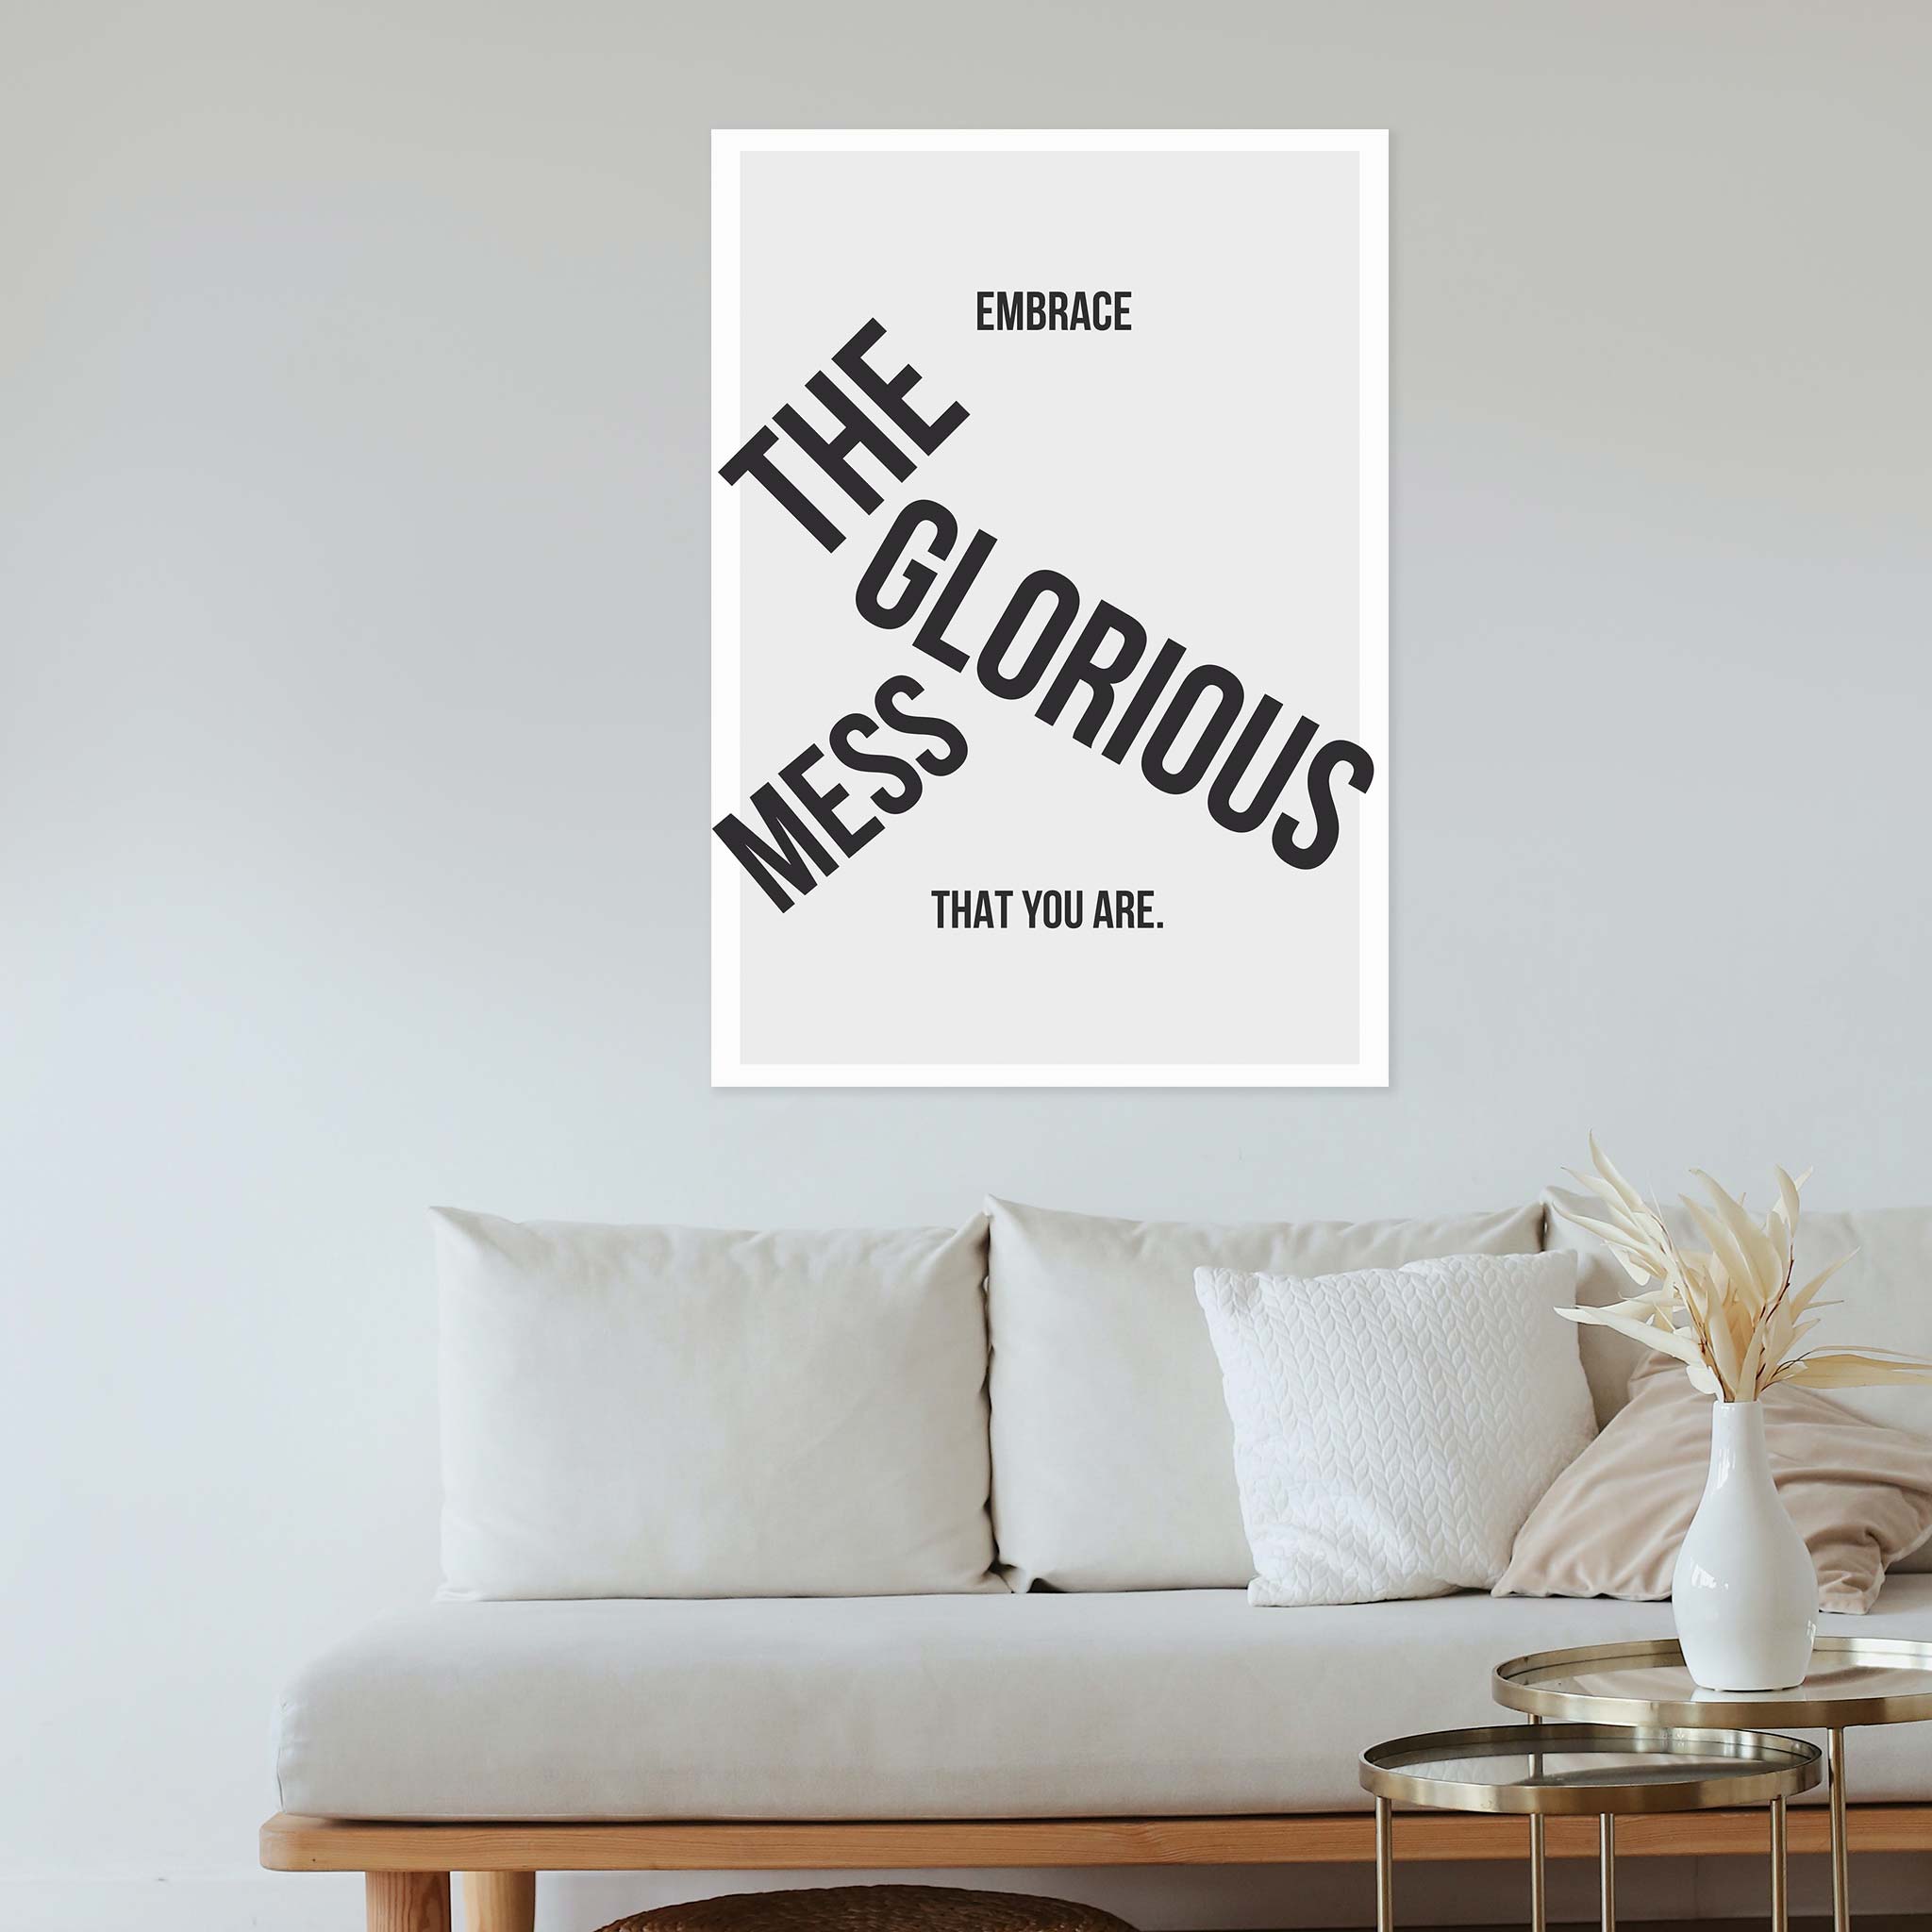 Embrace the glorious mess that you are